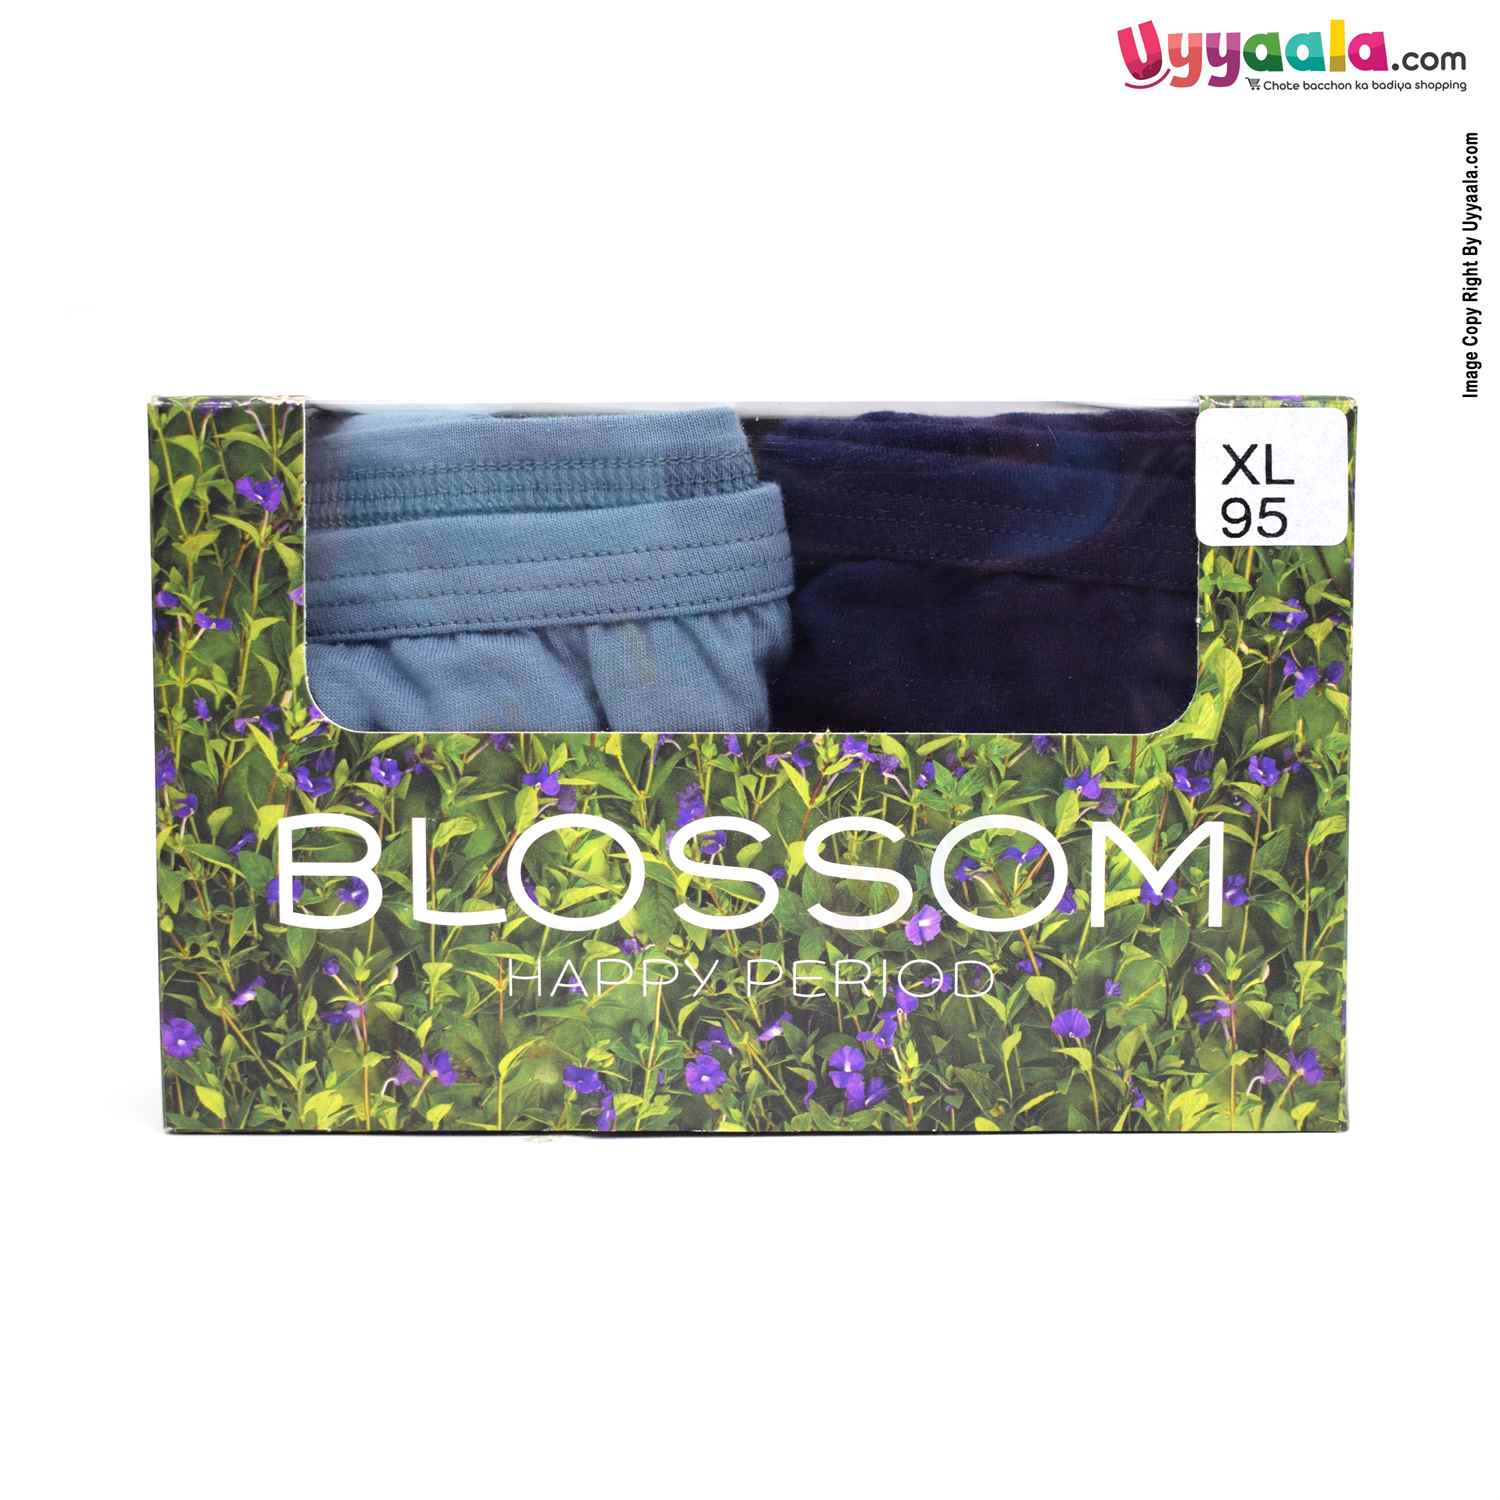 BLOSSOM Happy Period Maternity Mother Panty XL(95CM) Gray / Navy Blue Combo Pack